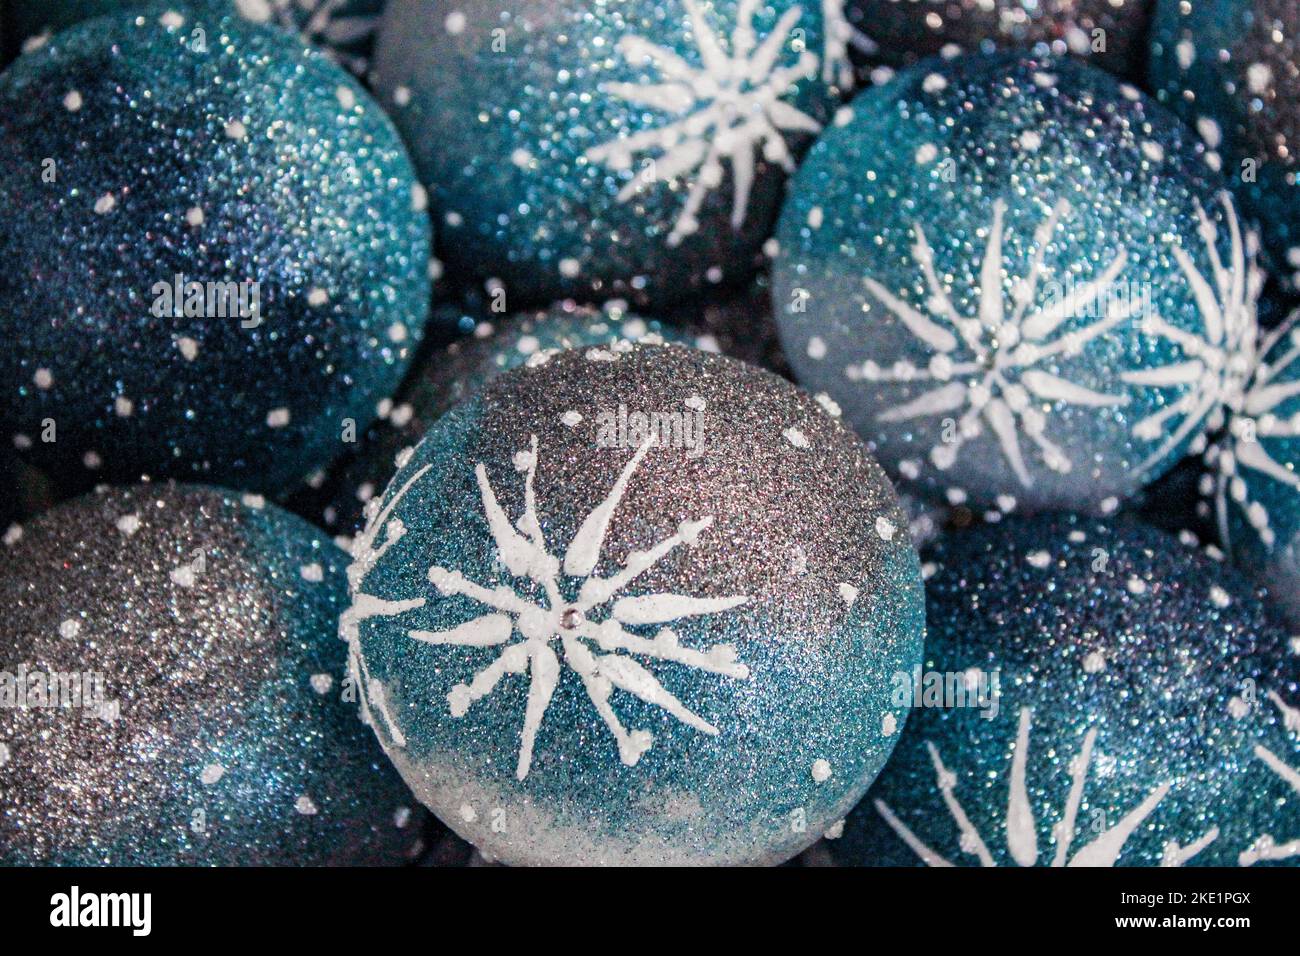 Close-up of Christmas tree glass balls in blue with silver and white Christmas star, with rhinestones and sequins. Christmas background. Stock Photo